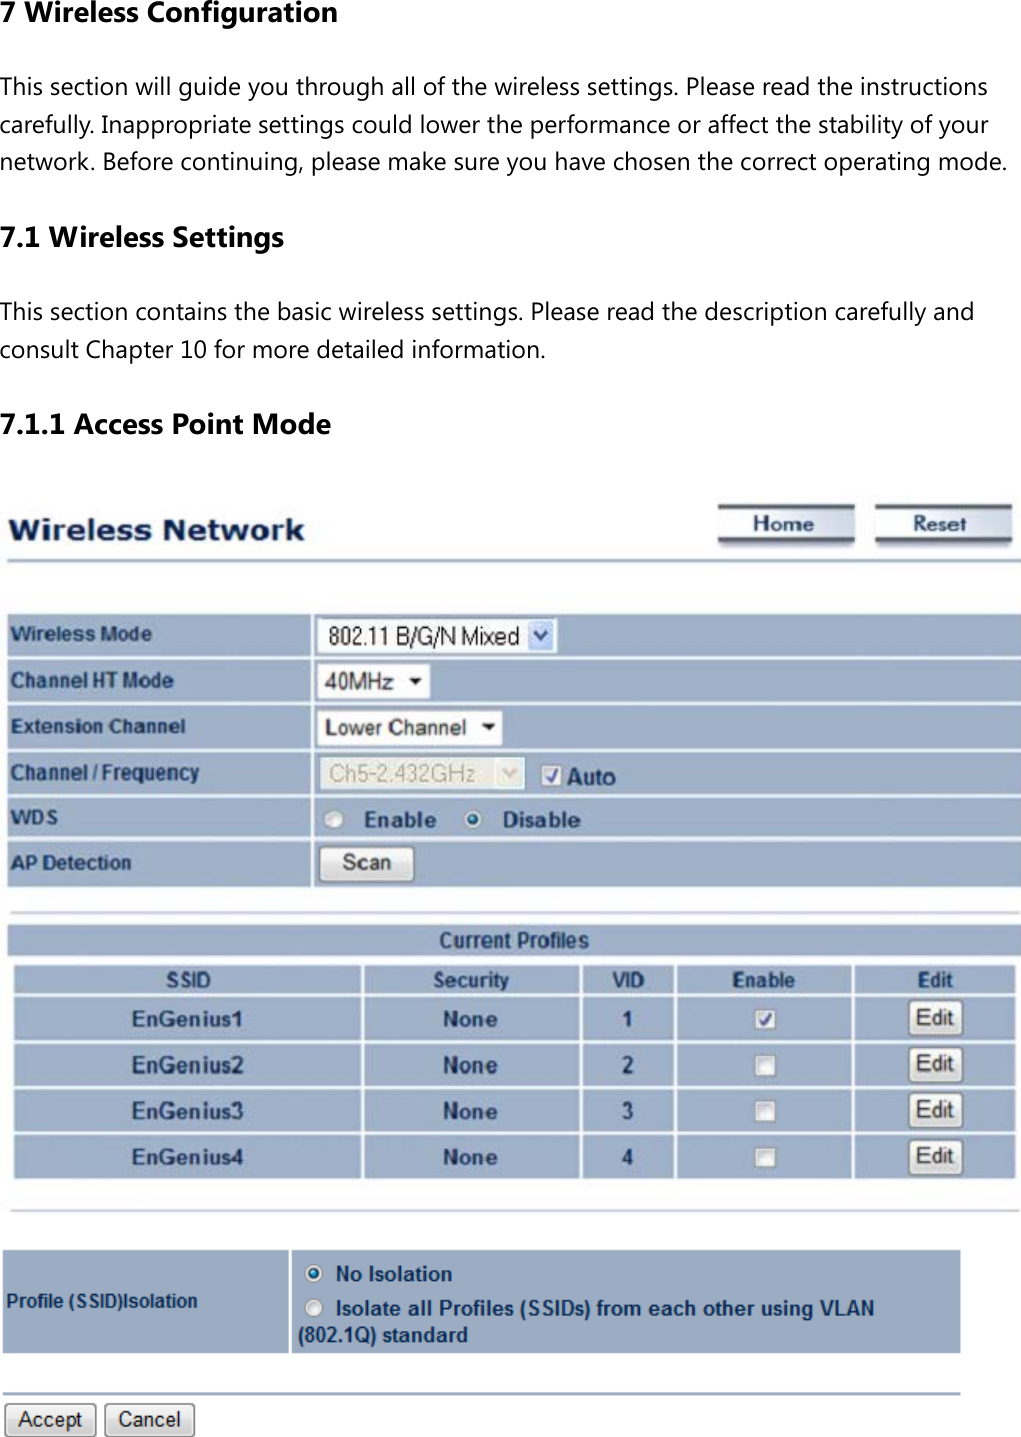 7 Wireless Configuration This section will guide you through all of the wireless settings. Please read the instructions carefully. Inappropriate settings could lower the performance or affect the stability of your network. Before continuing, please make sure you have chosen the correct operating mode. 7.1 Wireless Settings This section contains the basic wireless settings. Please read the description carefully and consult Chapter 10 for more detailed information. 7.1.1 Access Point Mode    